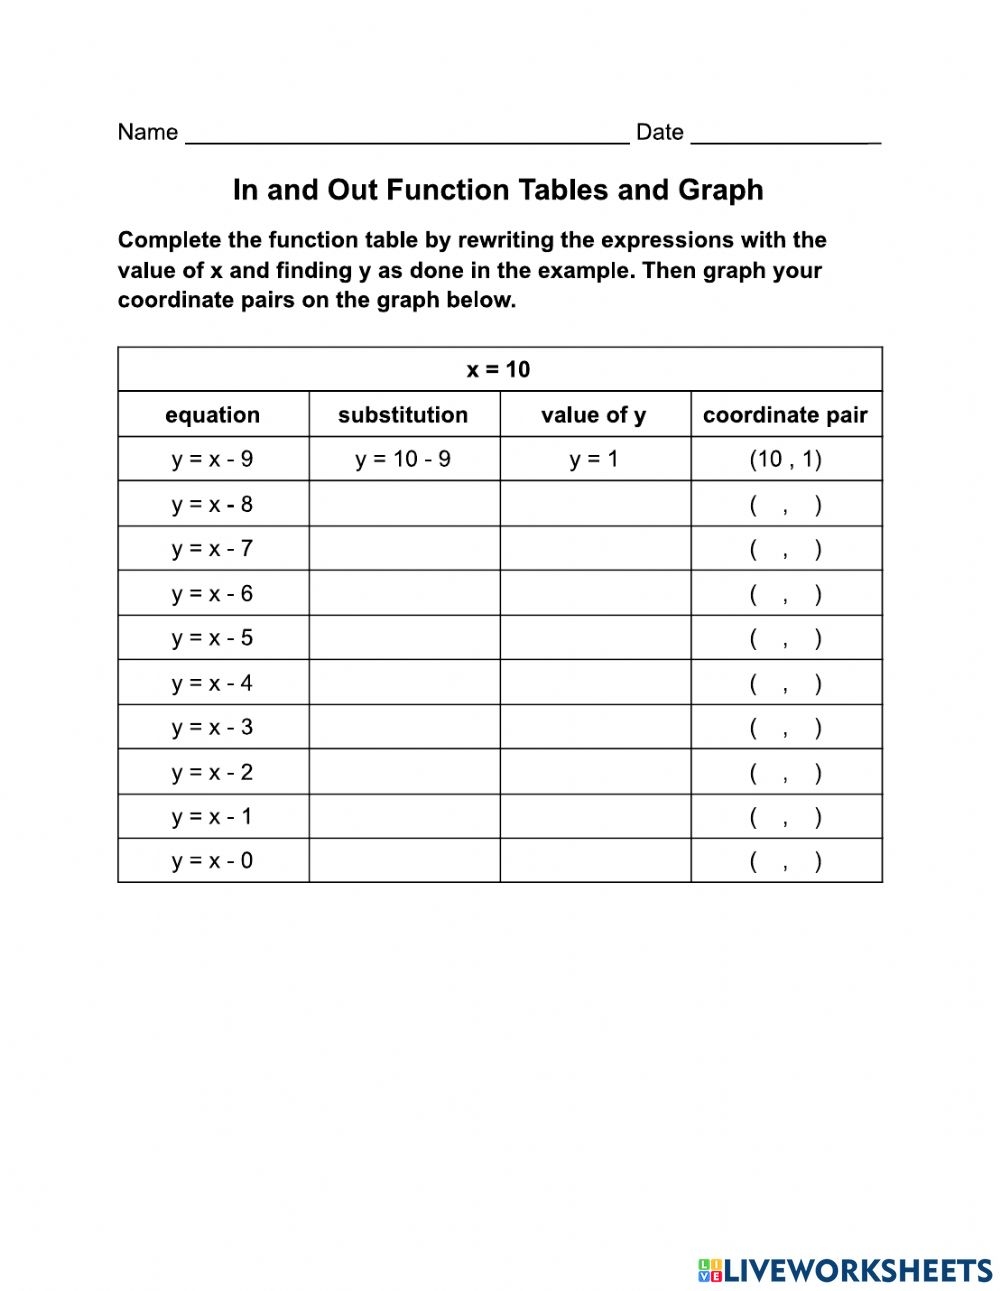 in-and-out-function-tables-and-graphing-worksheet-math-worksheet-answers